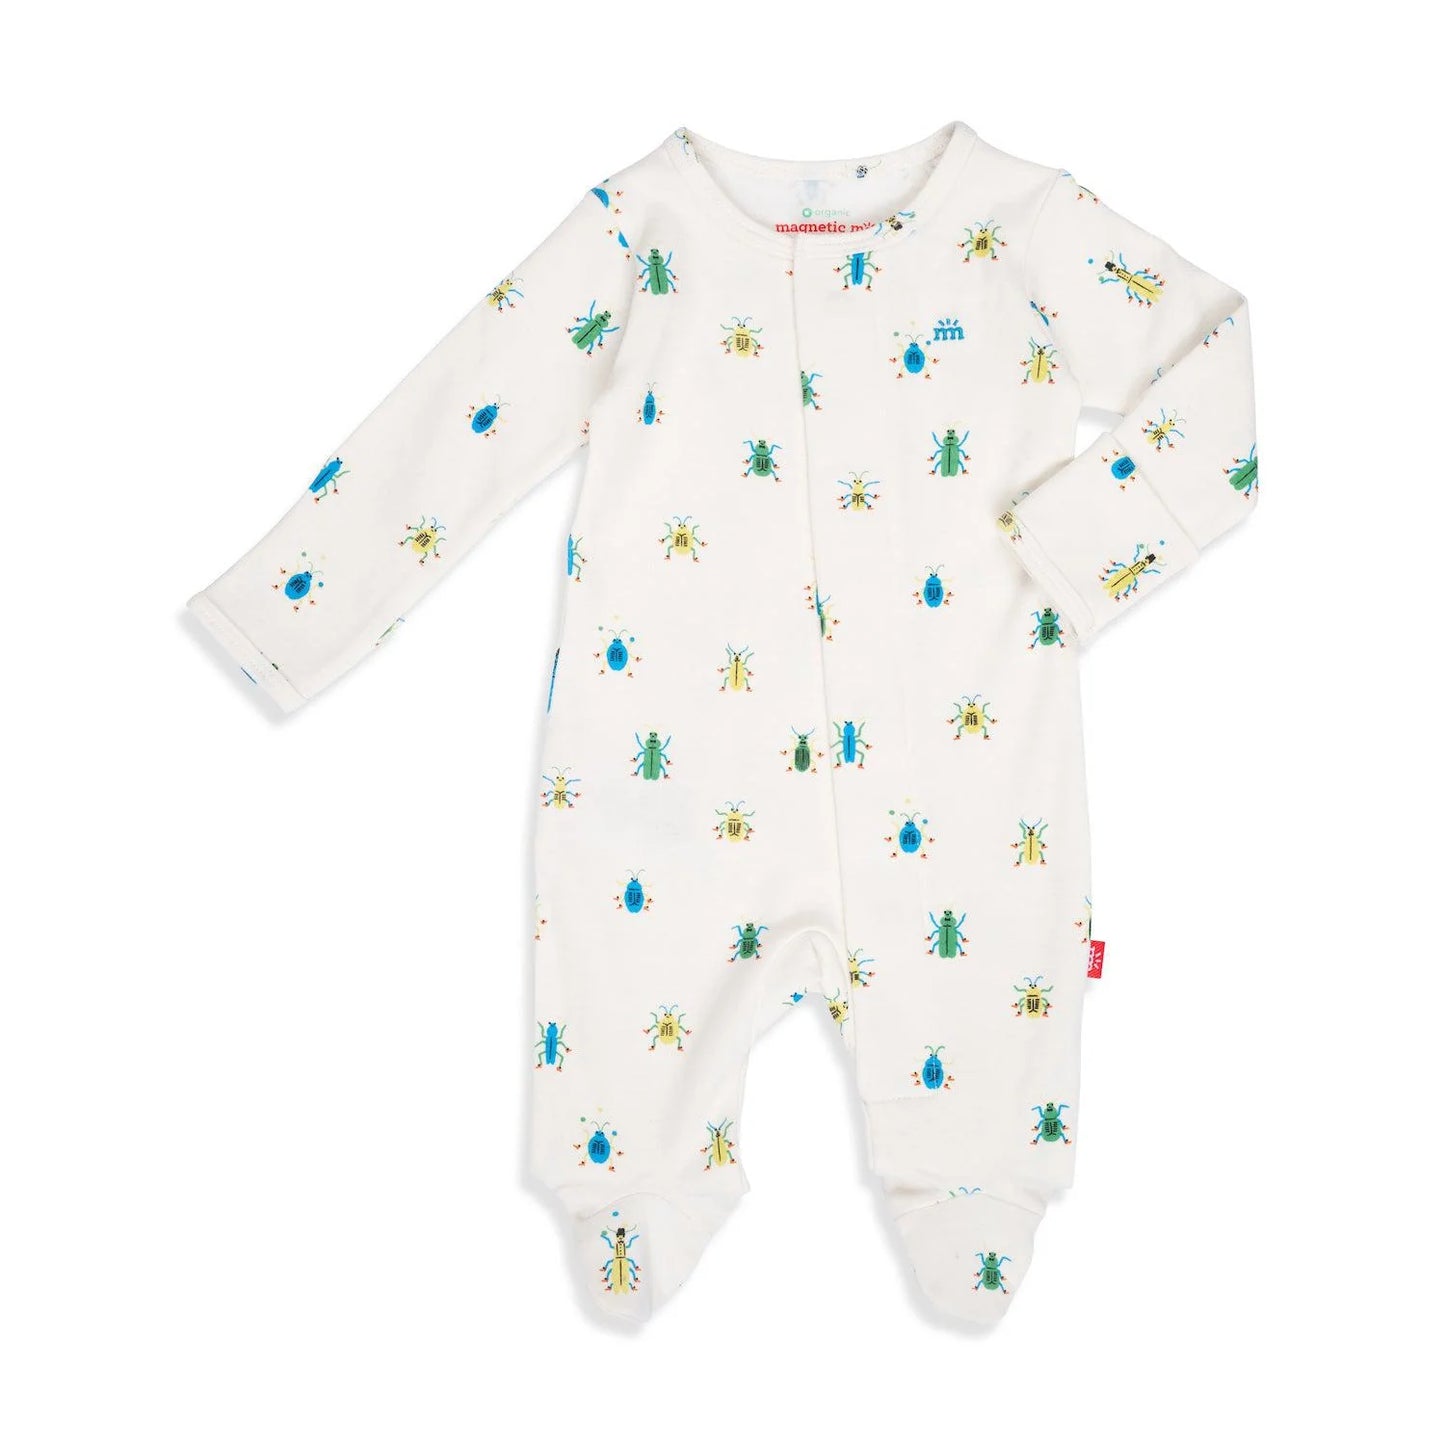 Just Wing It Organic Cotton Magnetic Footie - Magnetic Me